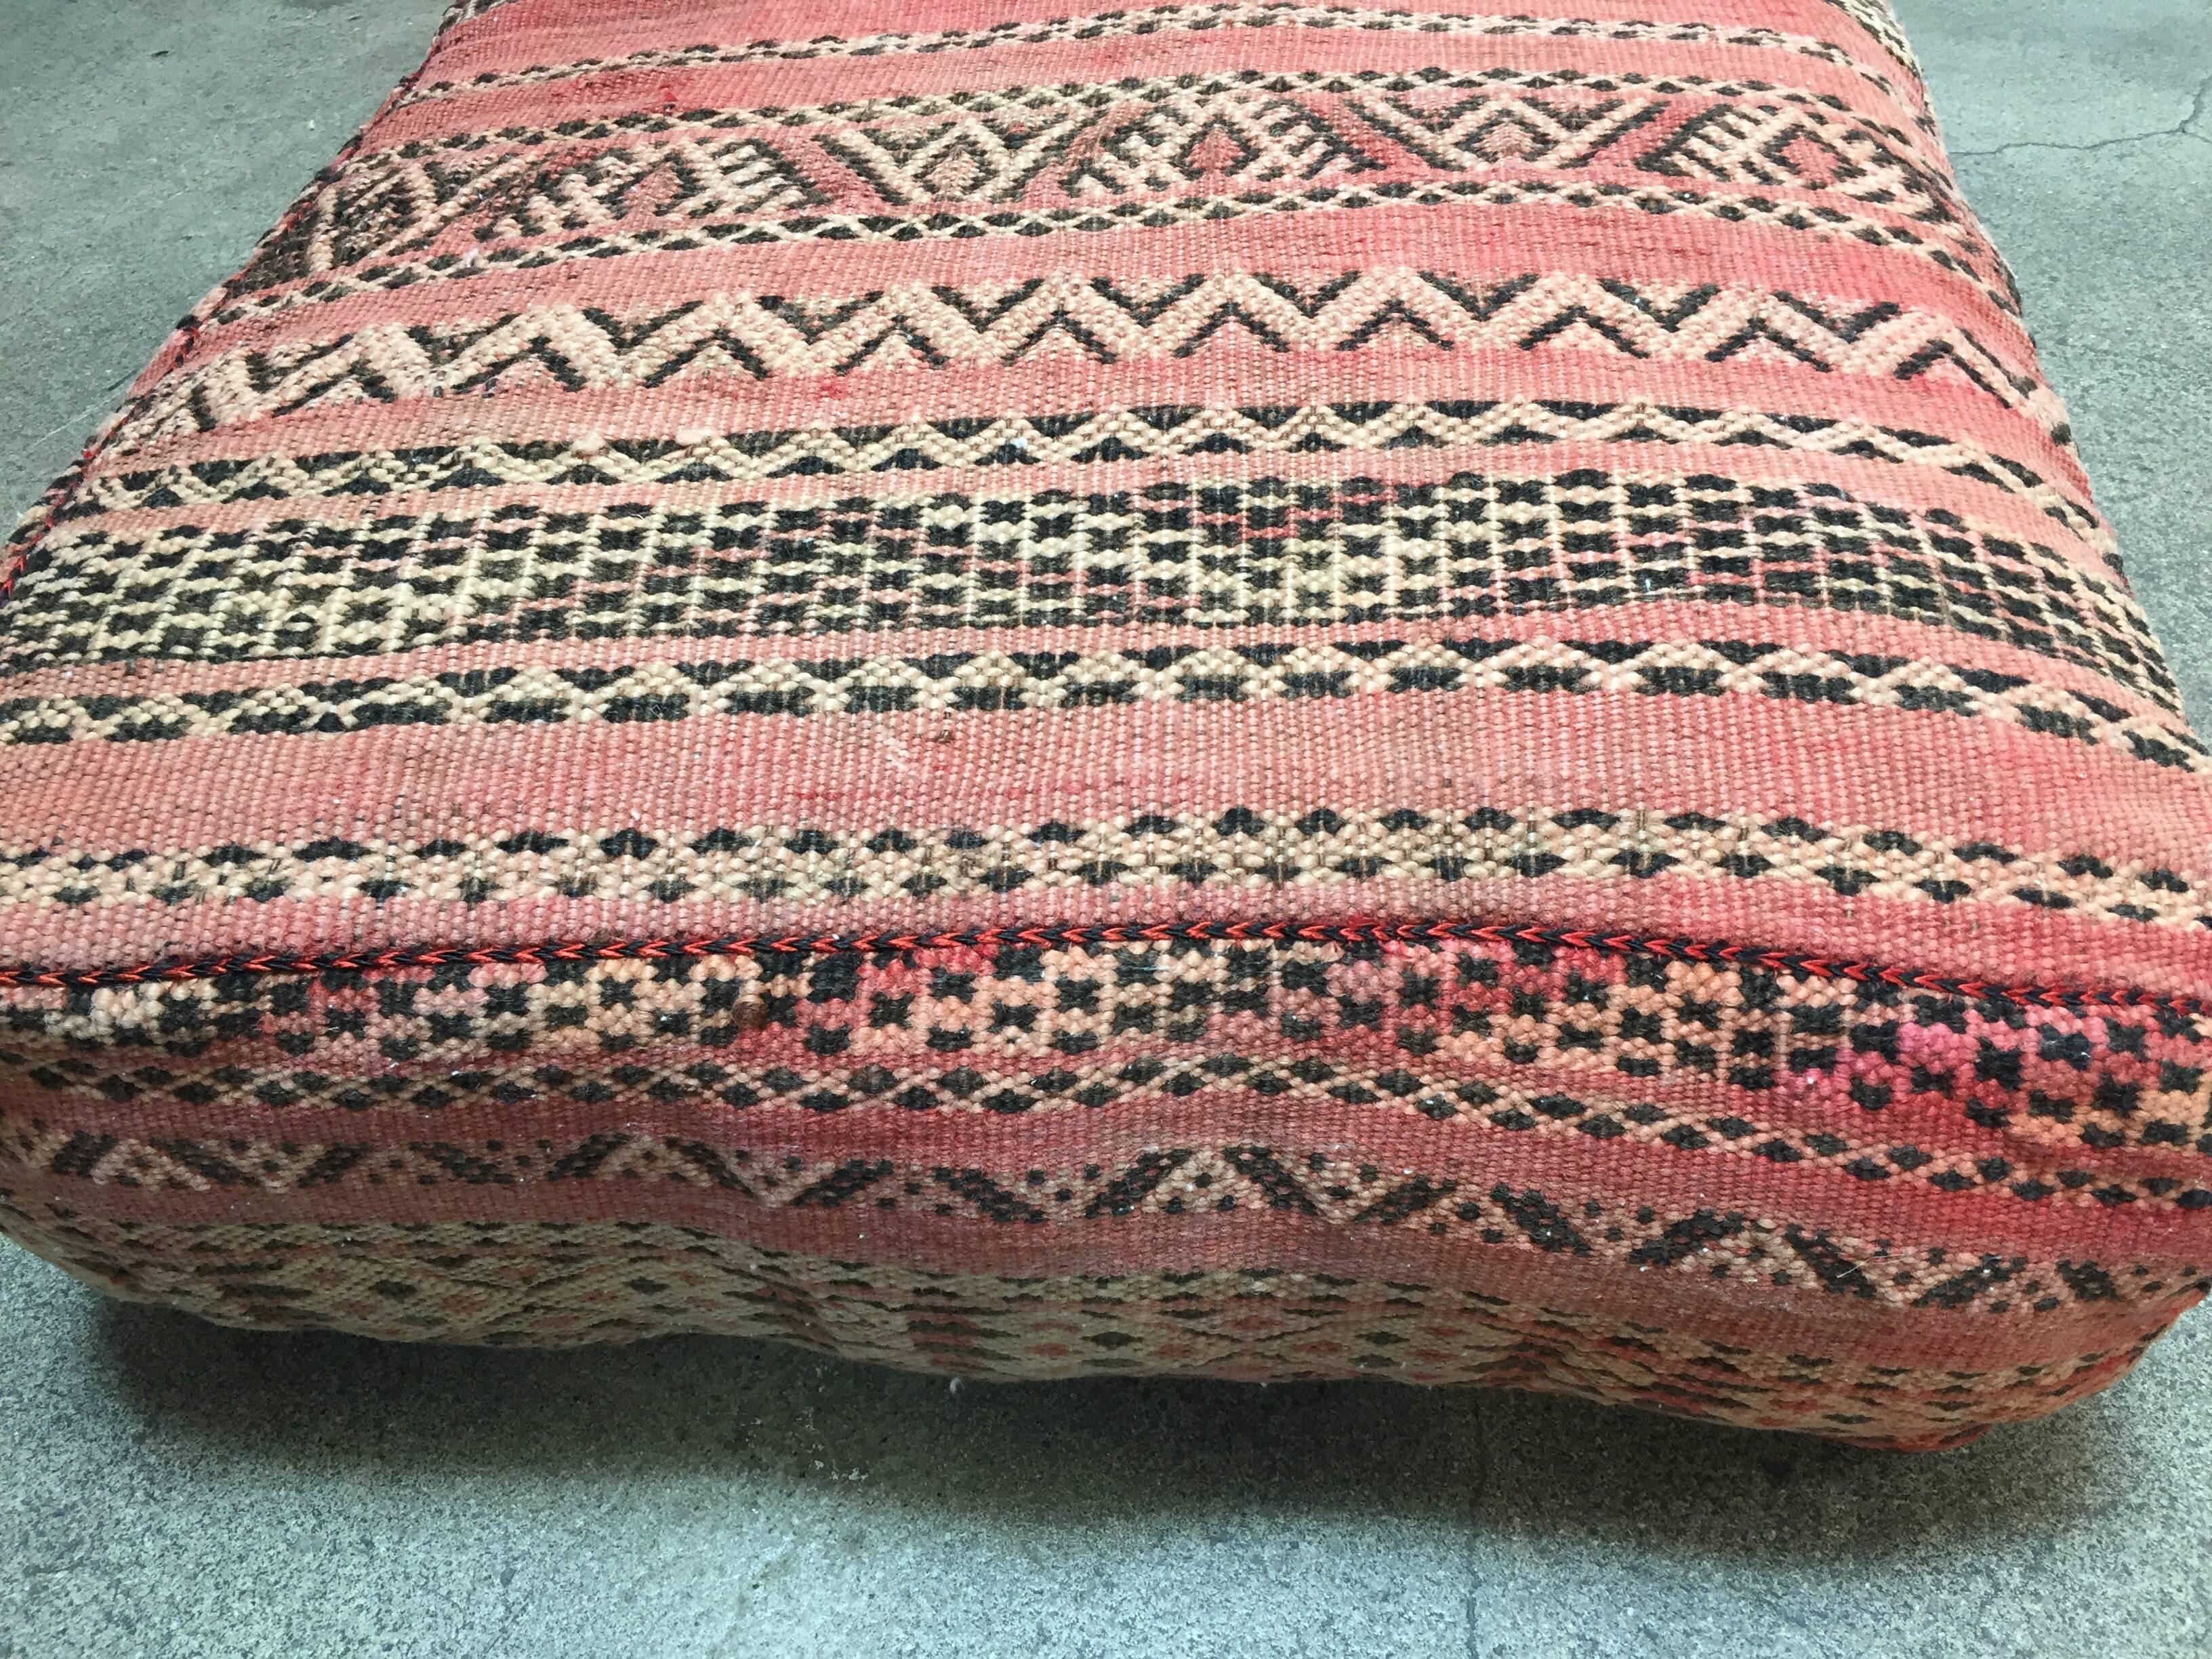 Moroccan Floor Pillow Tribal Seat Cushion Made from a Vintage Berber Rug 9